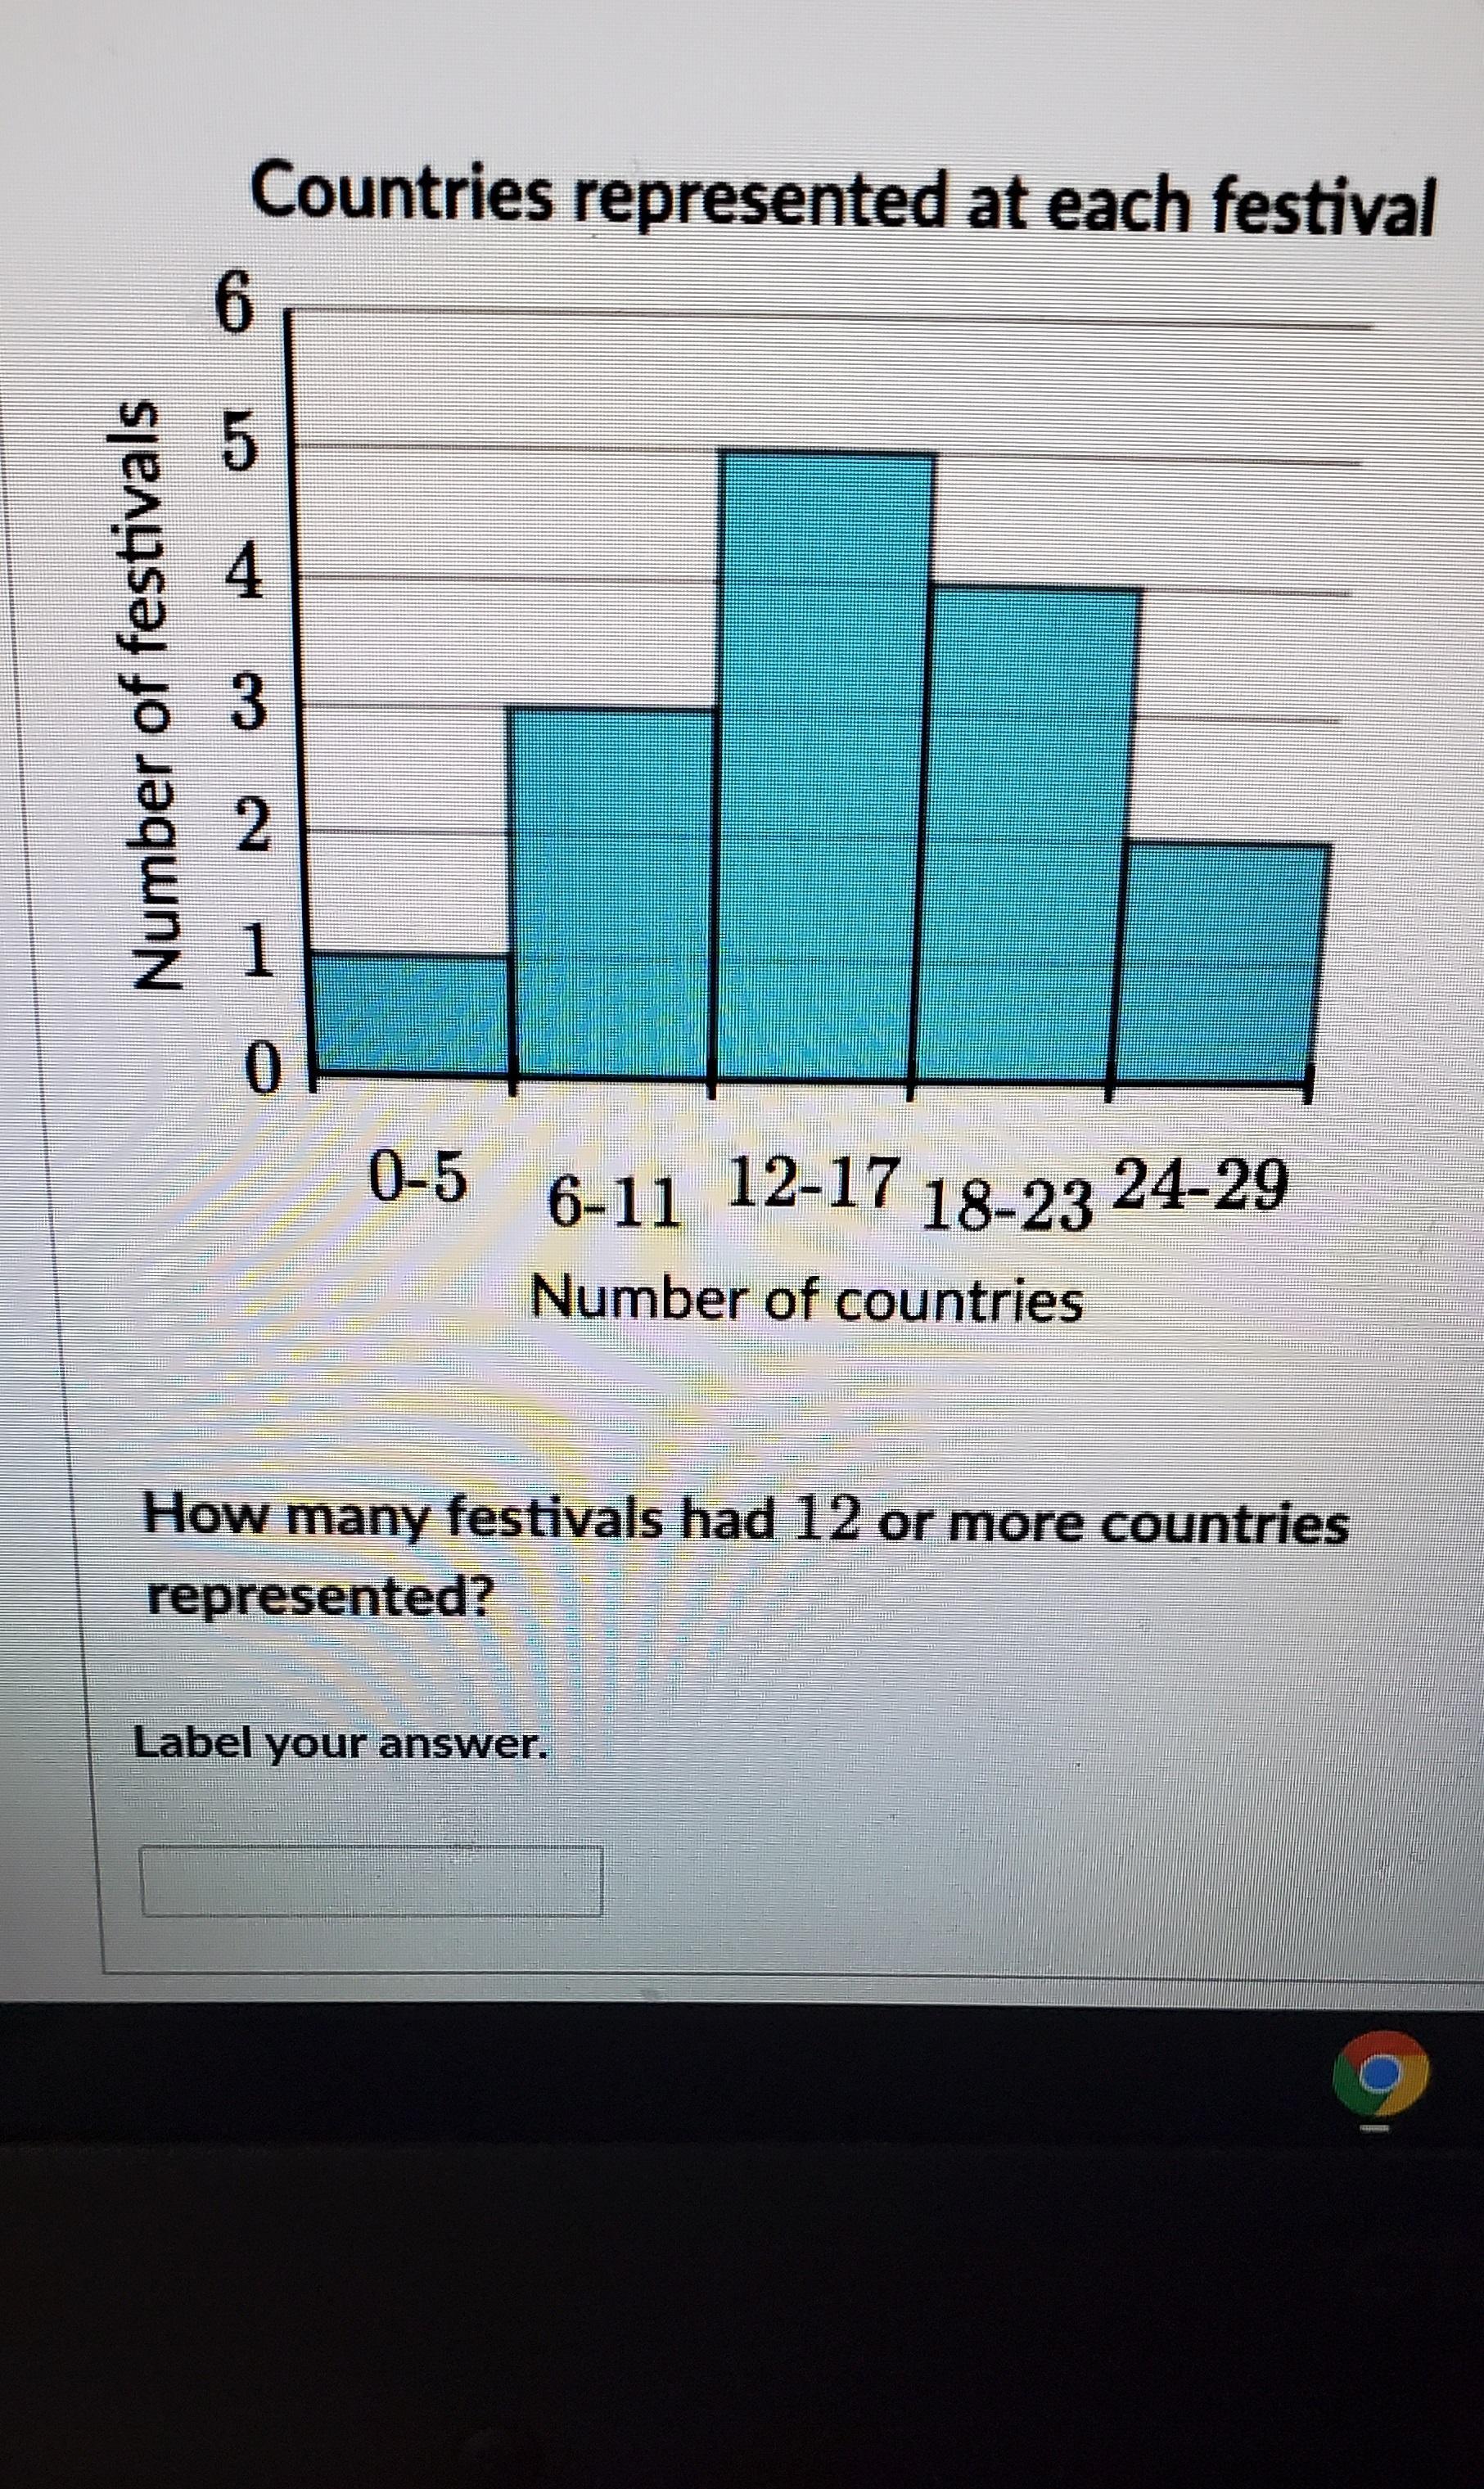 Countries Represented At Each Festival 6 5 4 Number Of Festivals 3 N 1 0 0-5 6-11 12-17 18-23 24-29 Number